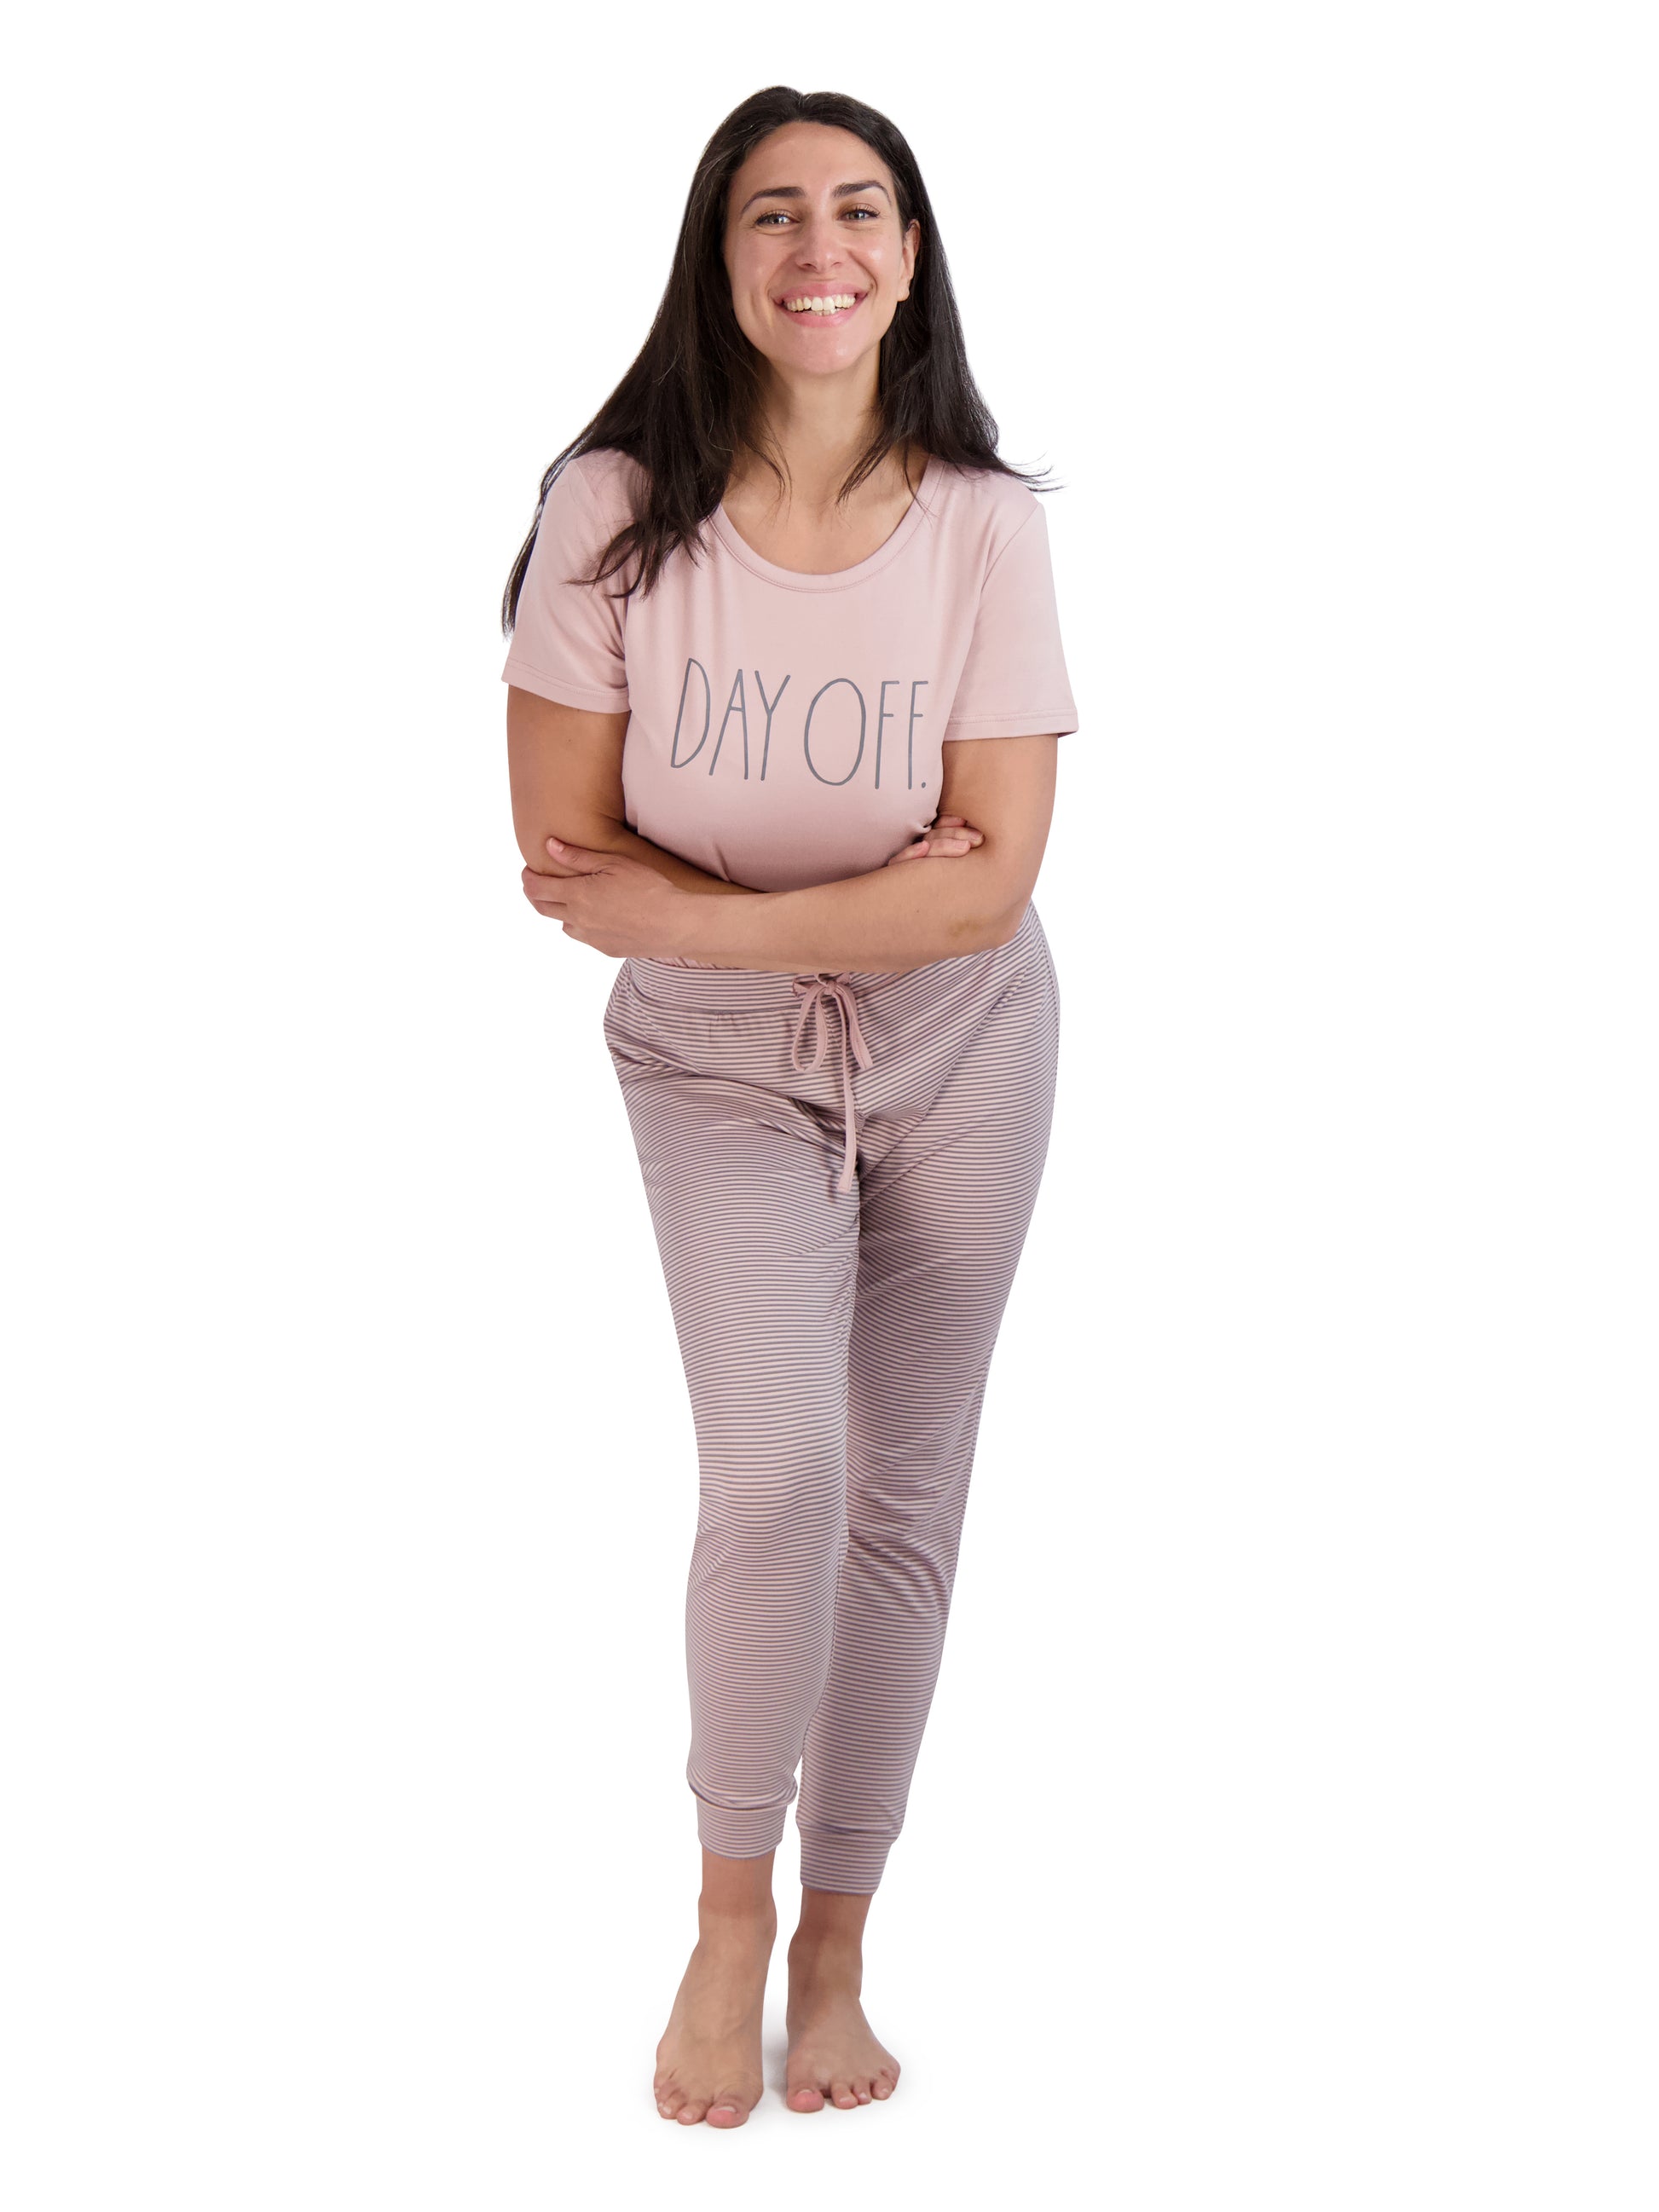 Rae Dunn Women's DAY OFF Short Sleeve Top and Drawstring Joggers